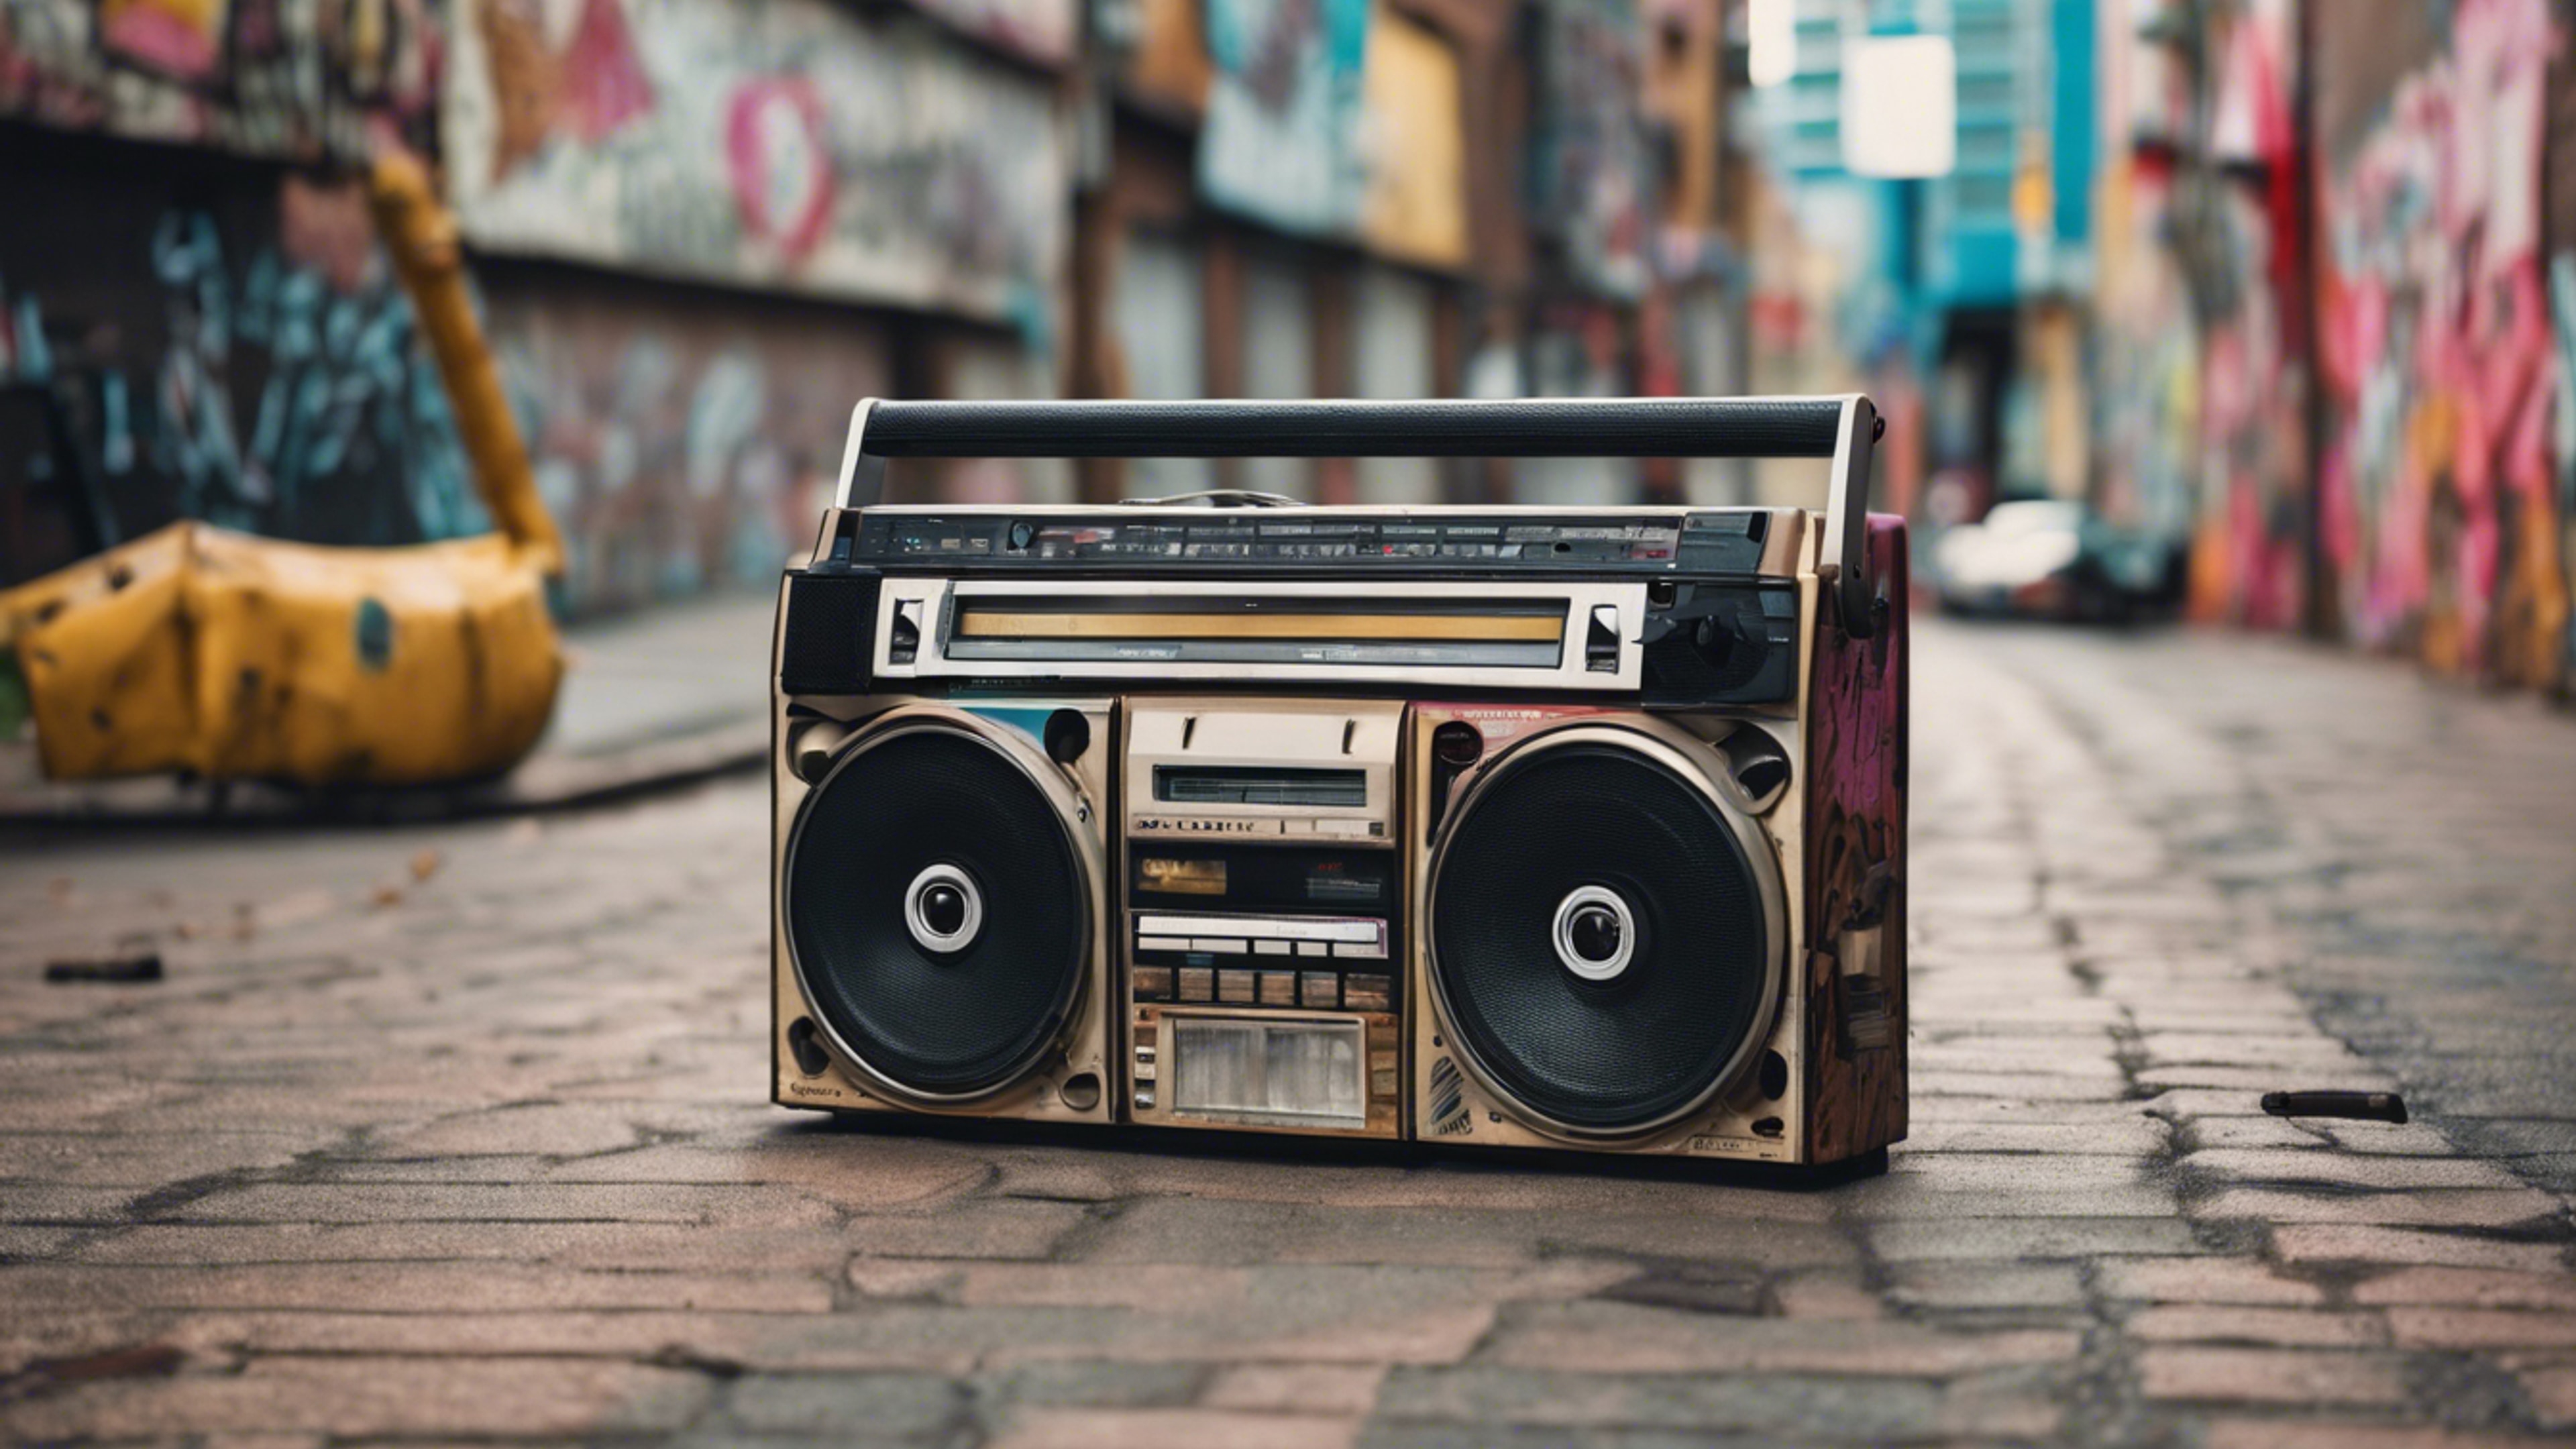 An old school 80s boombox playing cassette tapes on a graffitied street. วอลล์เปเปอร์[63e13512f9e44708b5c0]